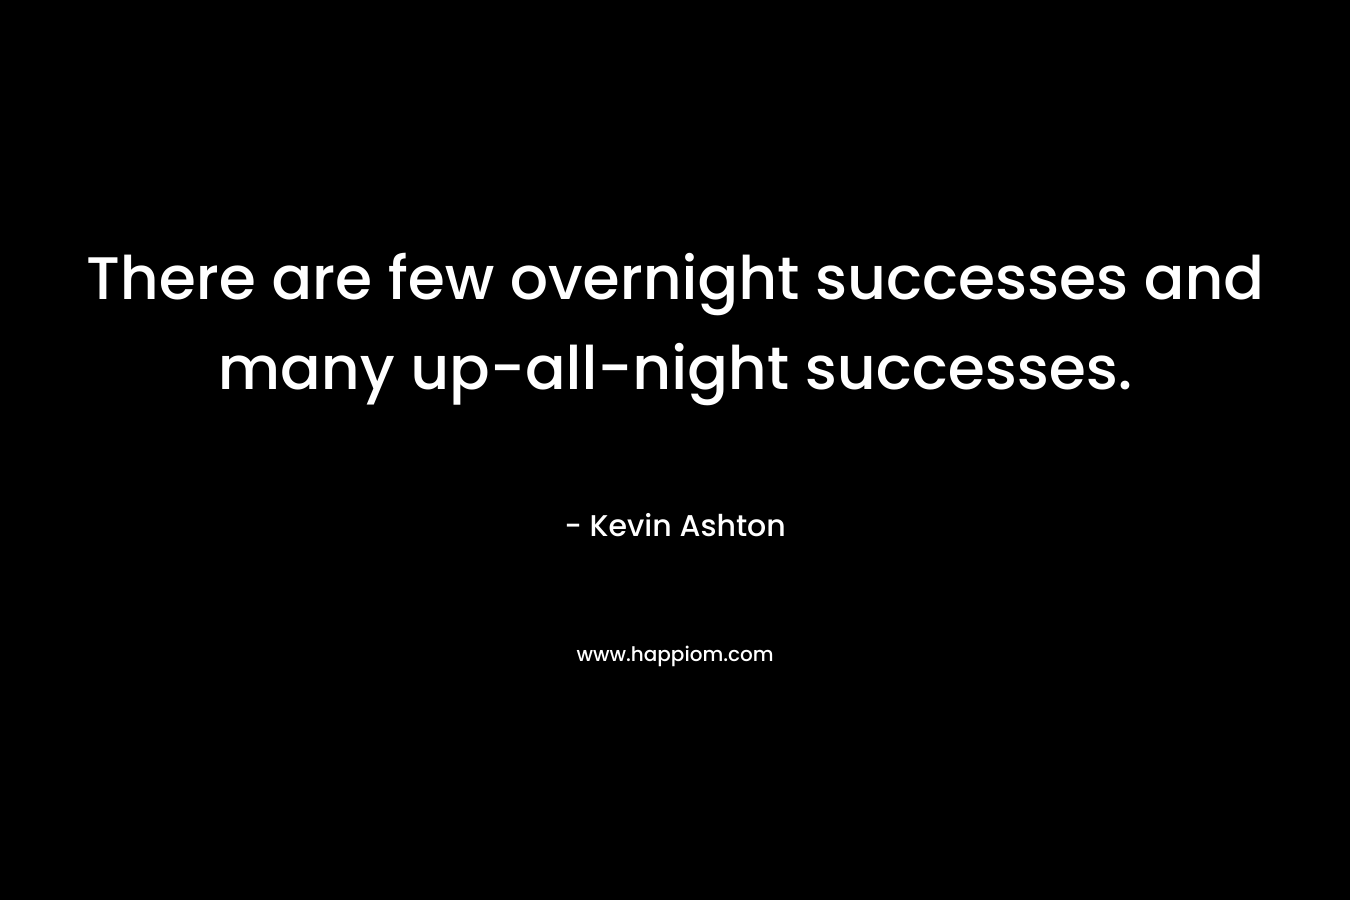 There are few overnight successes and many up-all-night successes.